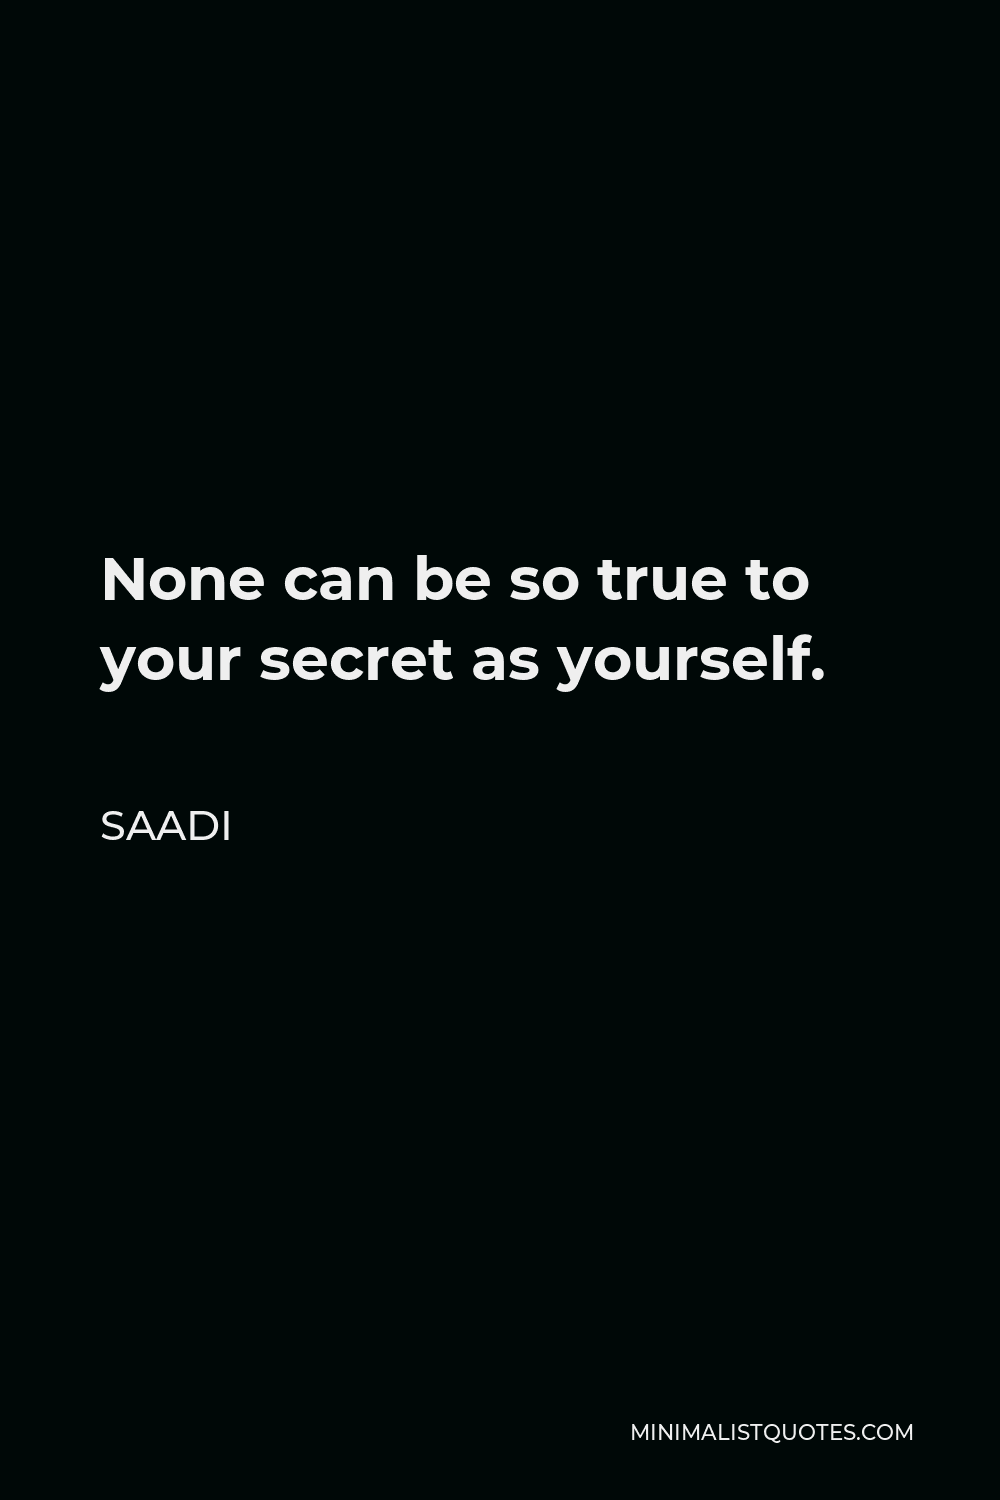 Saadi Quote - None can be so true to your secret as yourself.